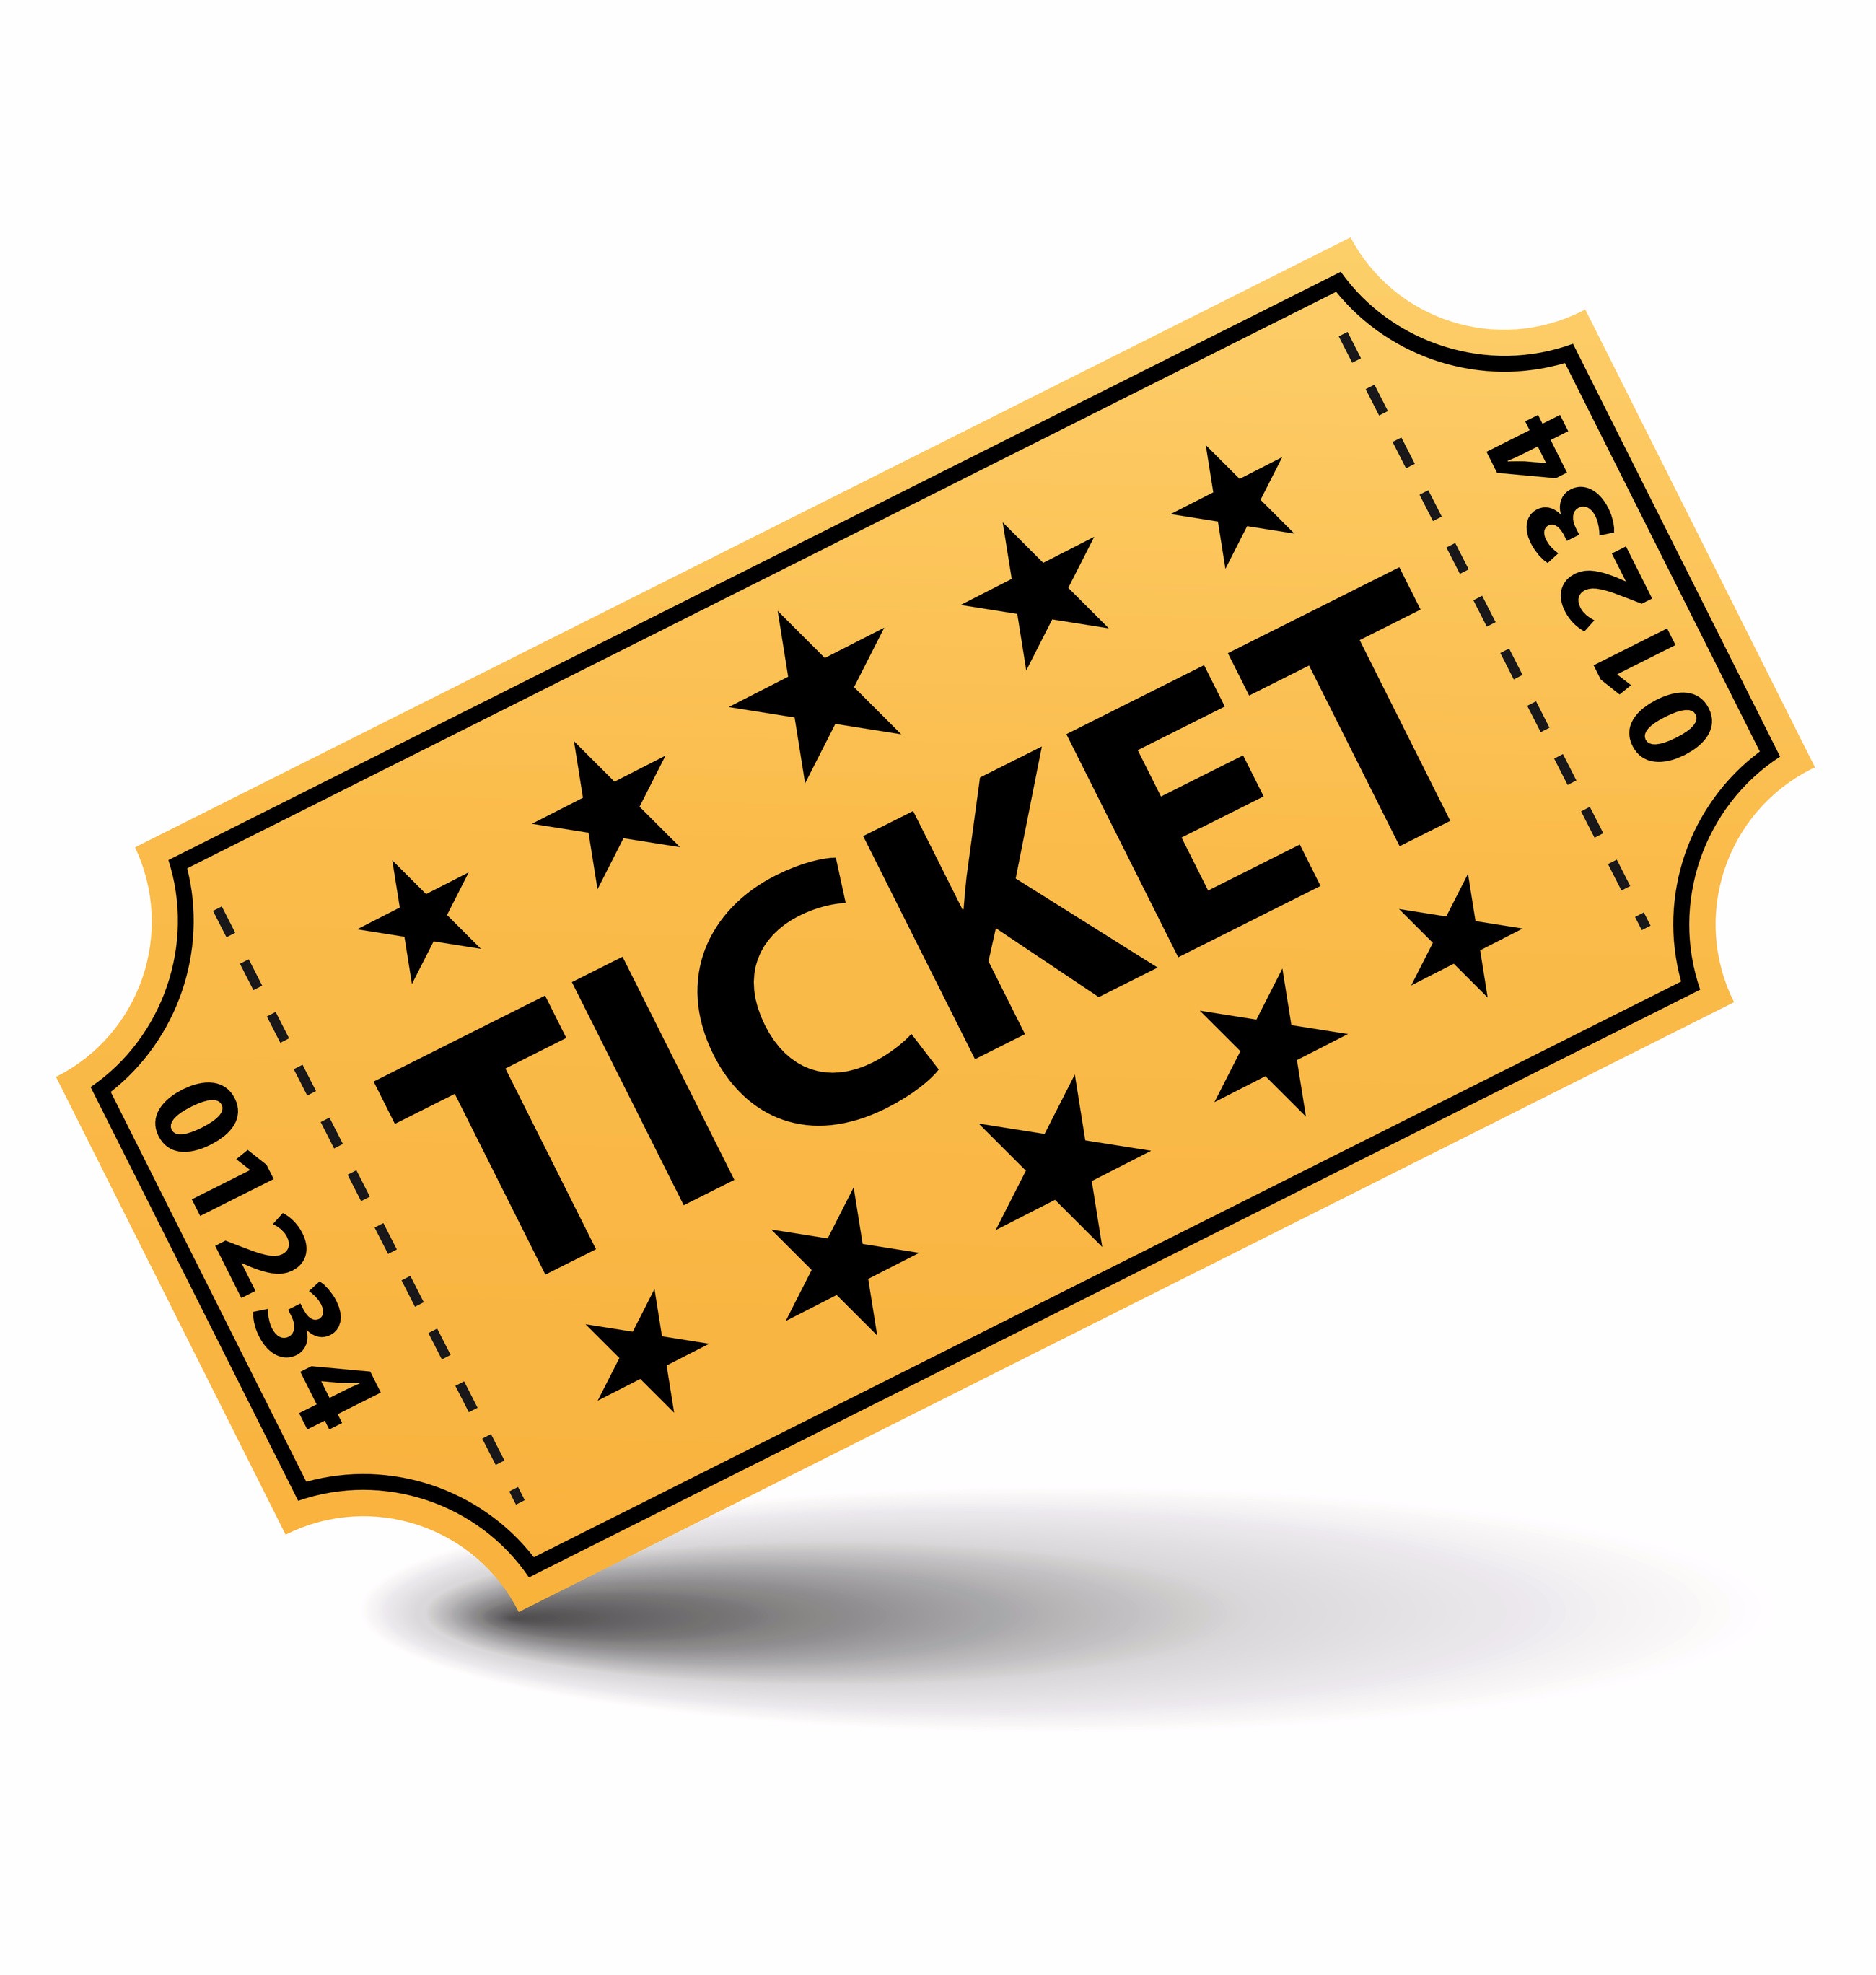 Free Carnival Ticket Cliparts, Download Free Clip Art, Free